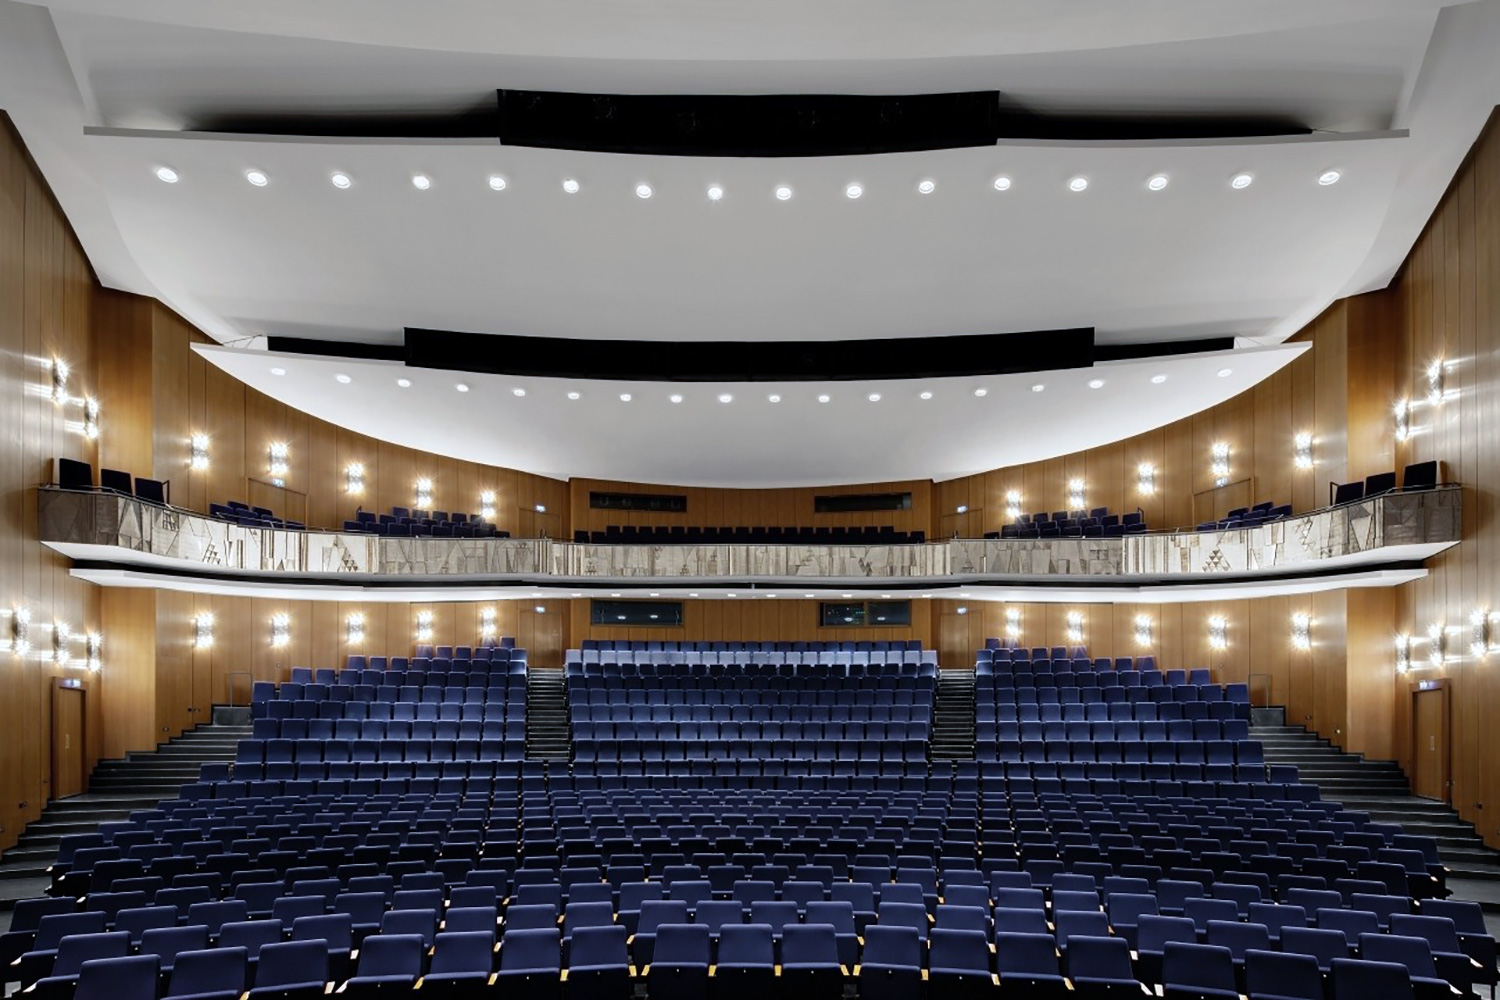 Worms Congress and Convention Center. Room acoustics and A/V systems design by WSDG / ADA-AMC.